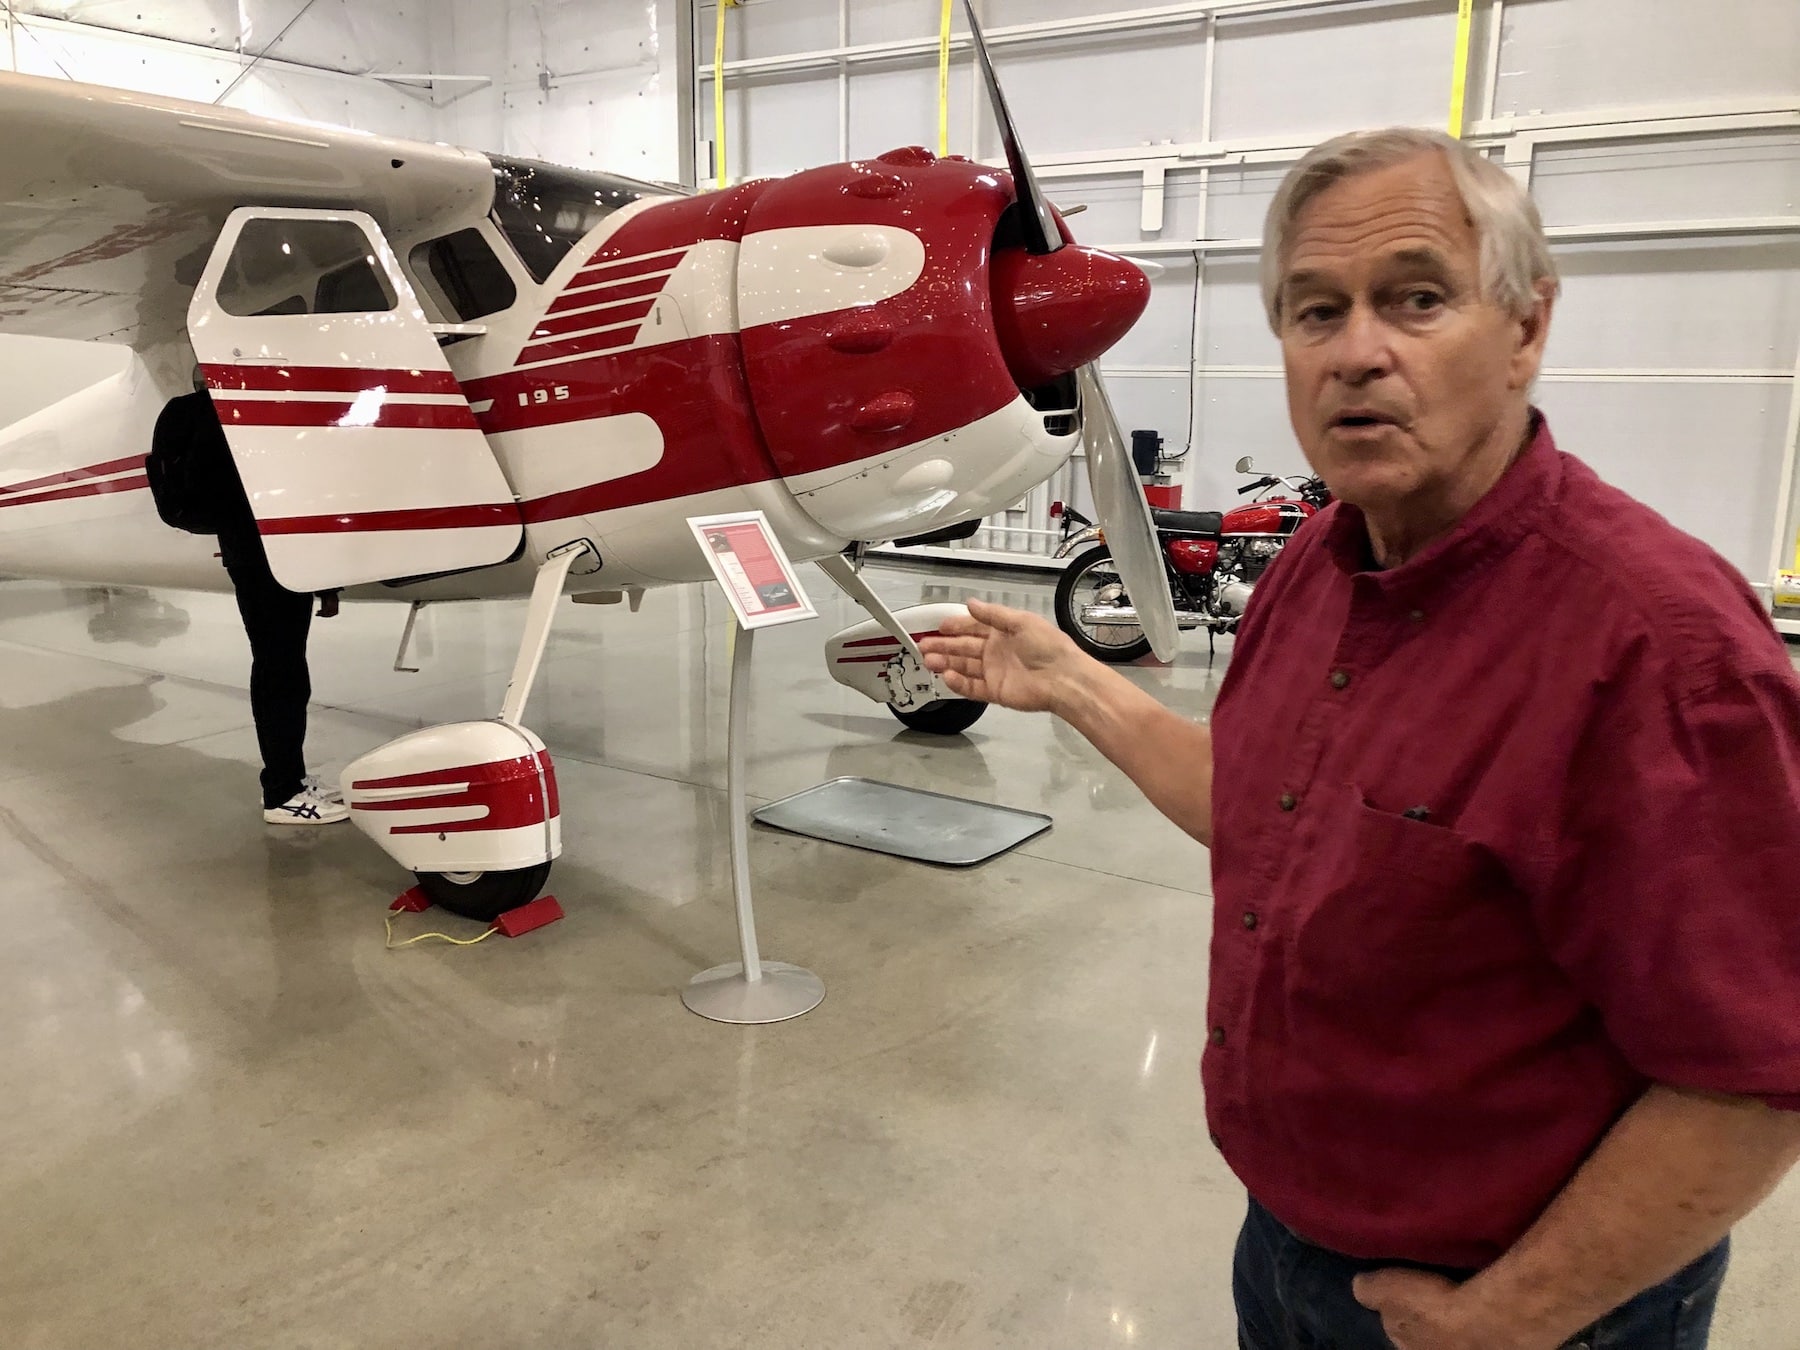 Bill Juranich with the 1953 Cessna 195, the Lear jet of its time.